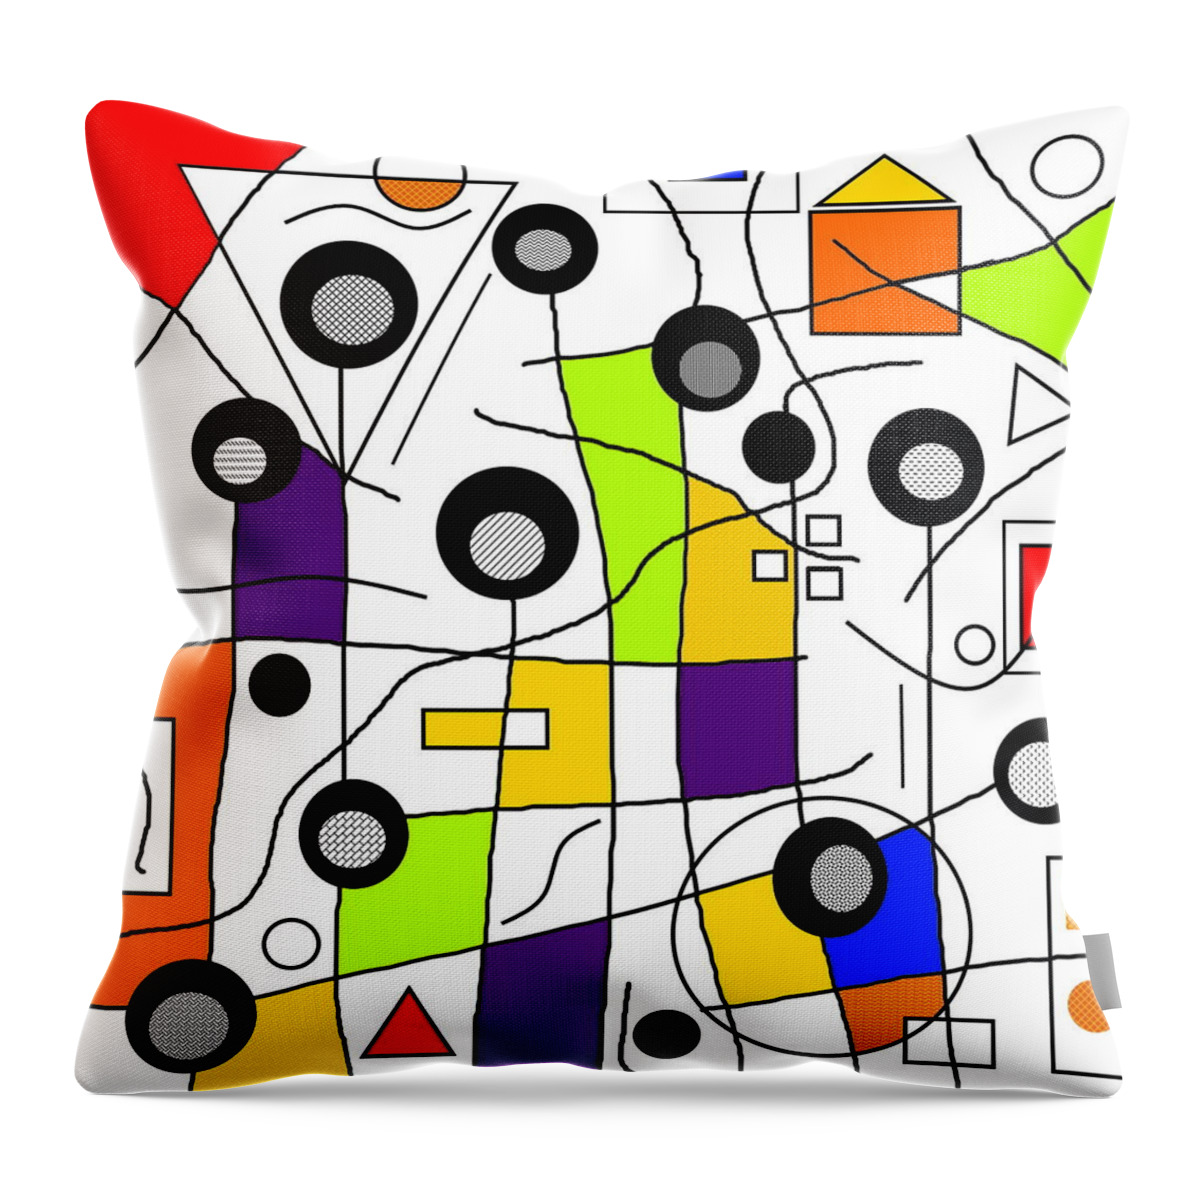 Red Throw Pillow featuring the digital art No Rhythm by Designs By L